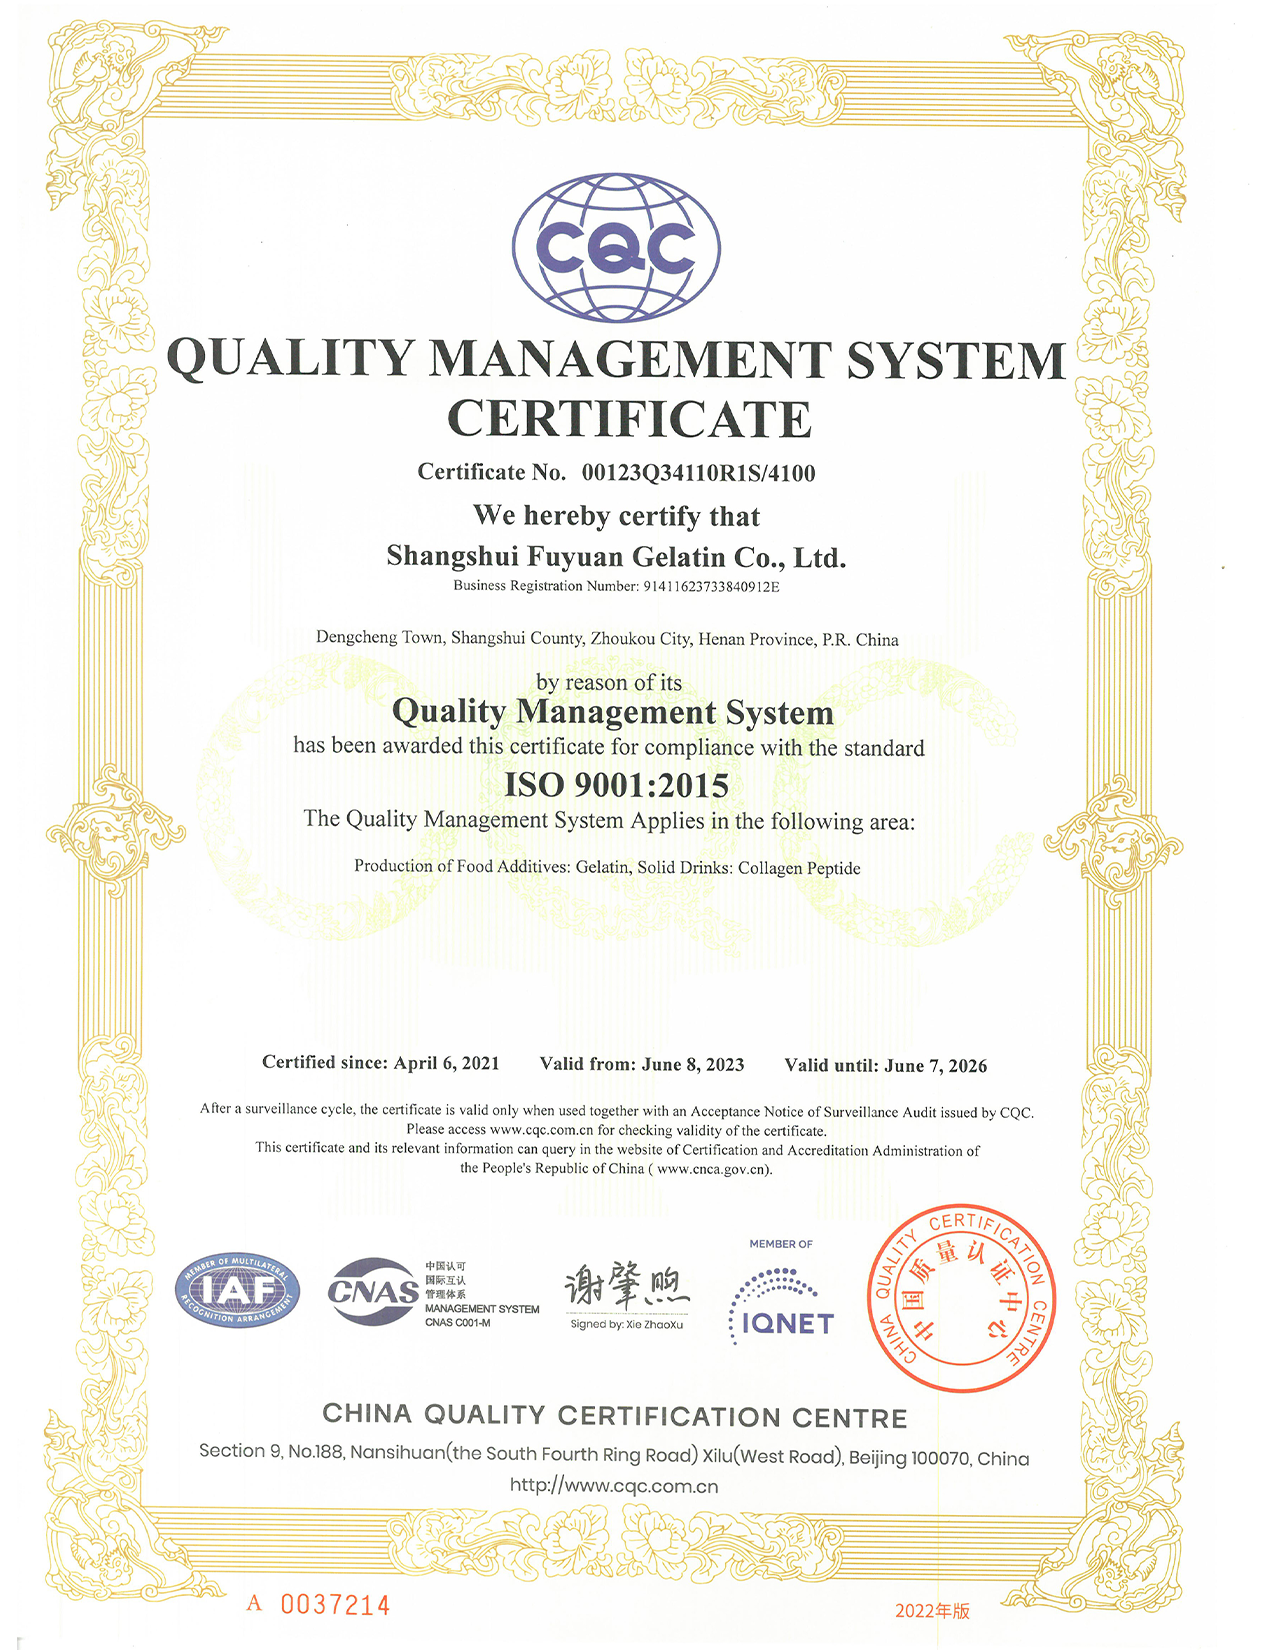 QUALITY MANAGEMENT SYSTEMCERTIFICATE